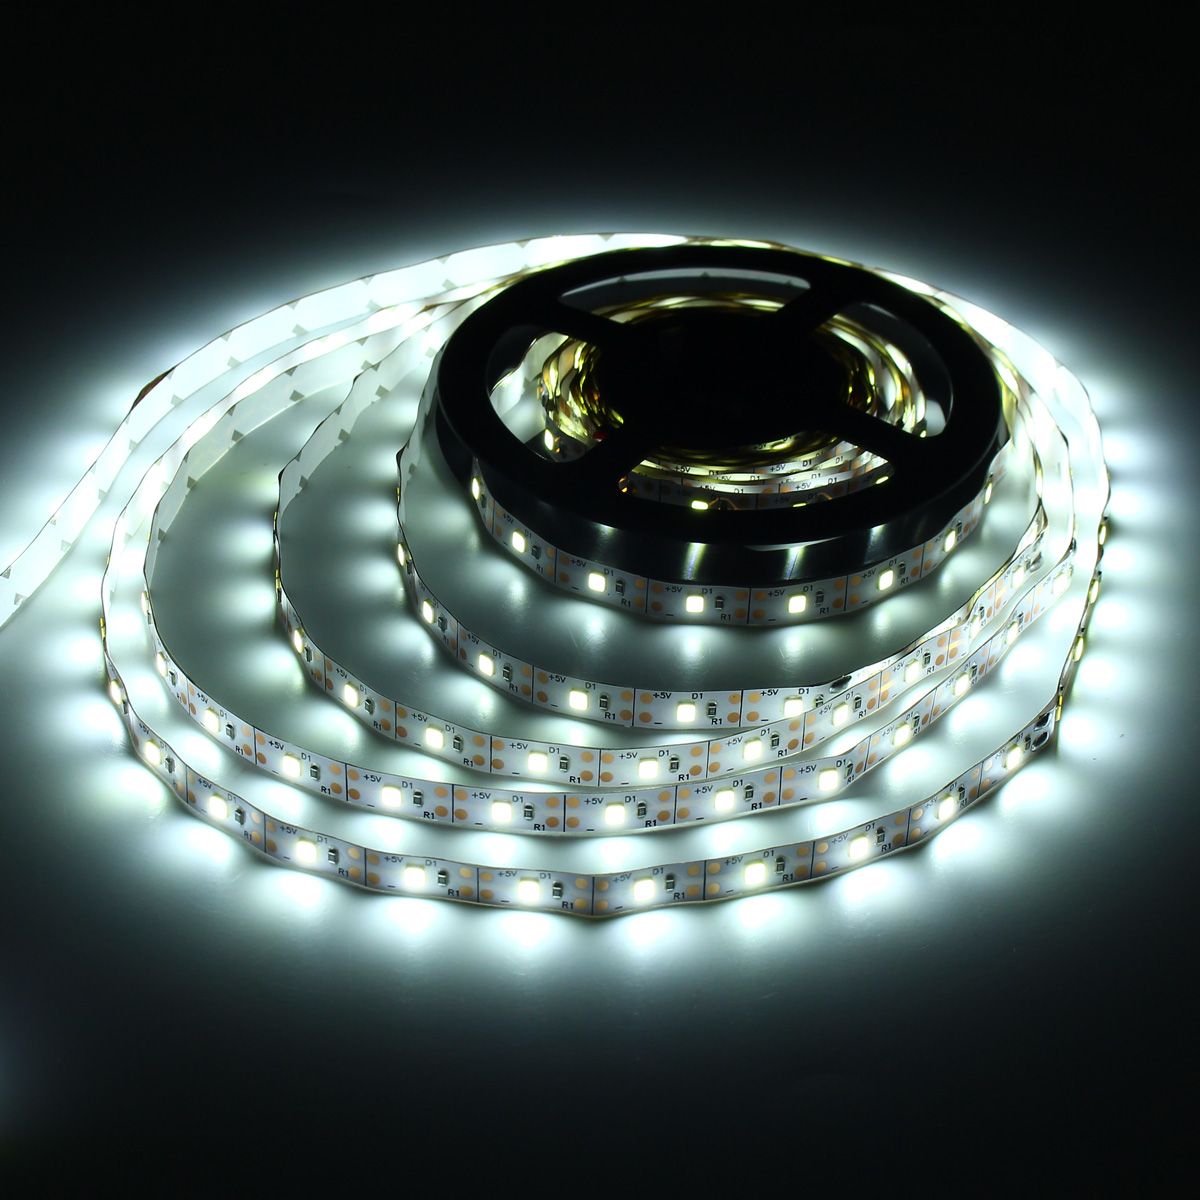 4M-SMD-2835-Non-waterproof-USB-240LEDs-Strip-TV-Lighting-PC-Backlight-for-Holiday-DC5V-1197557